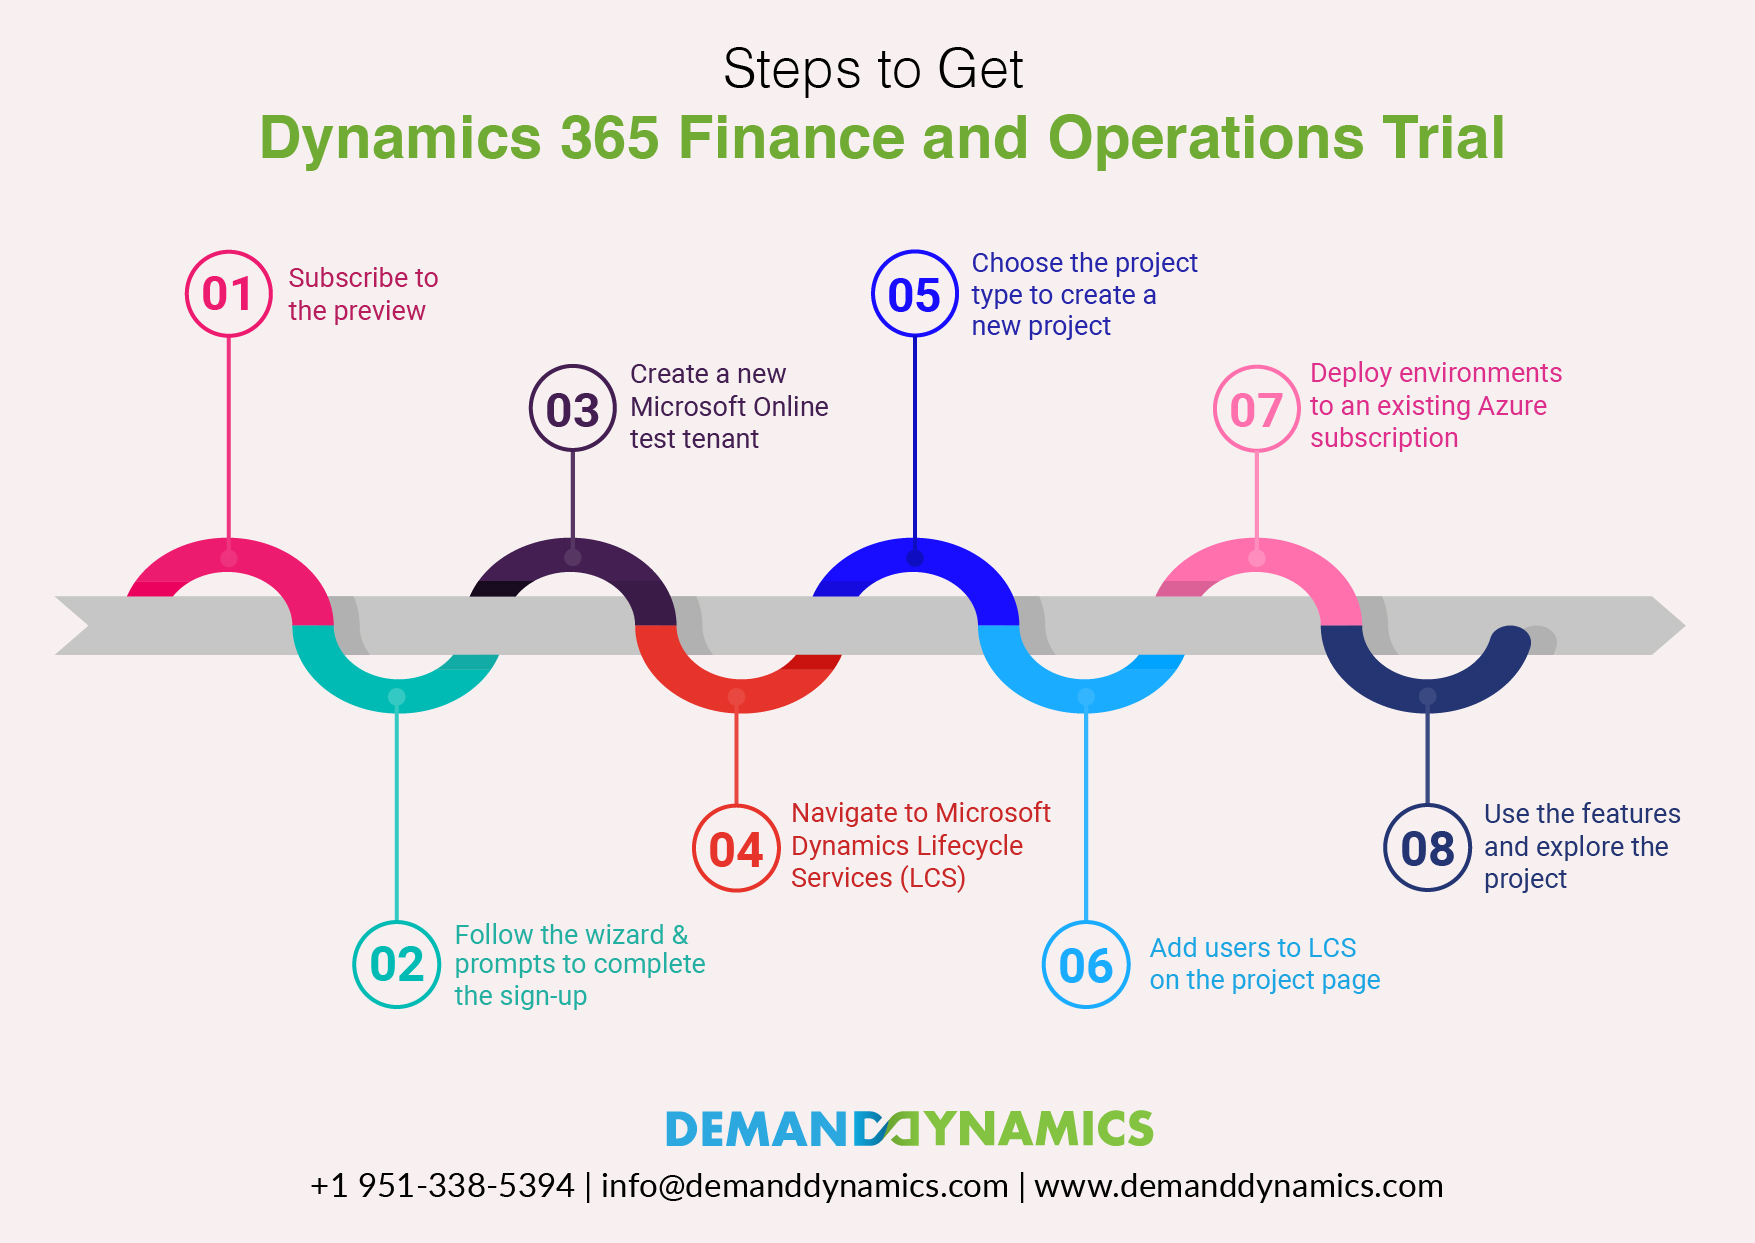 Steps to Get Dynamics 365 Finance and Operations Trial